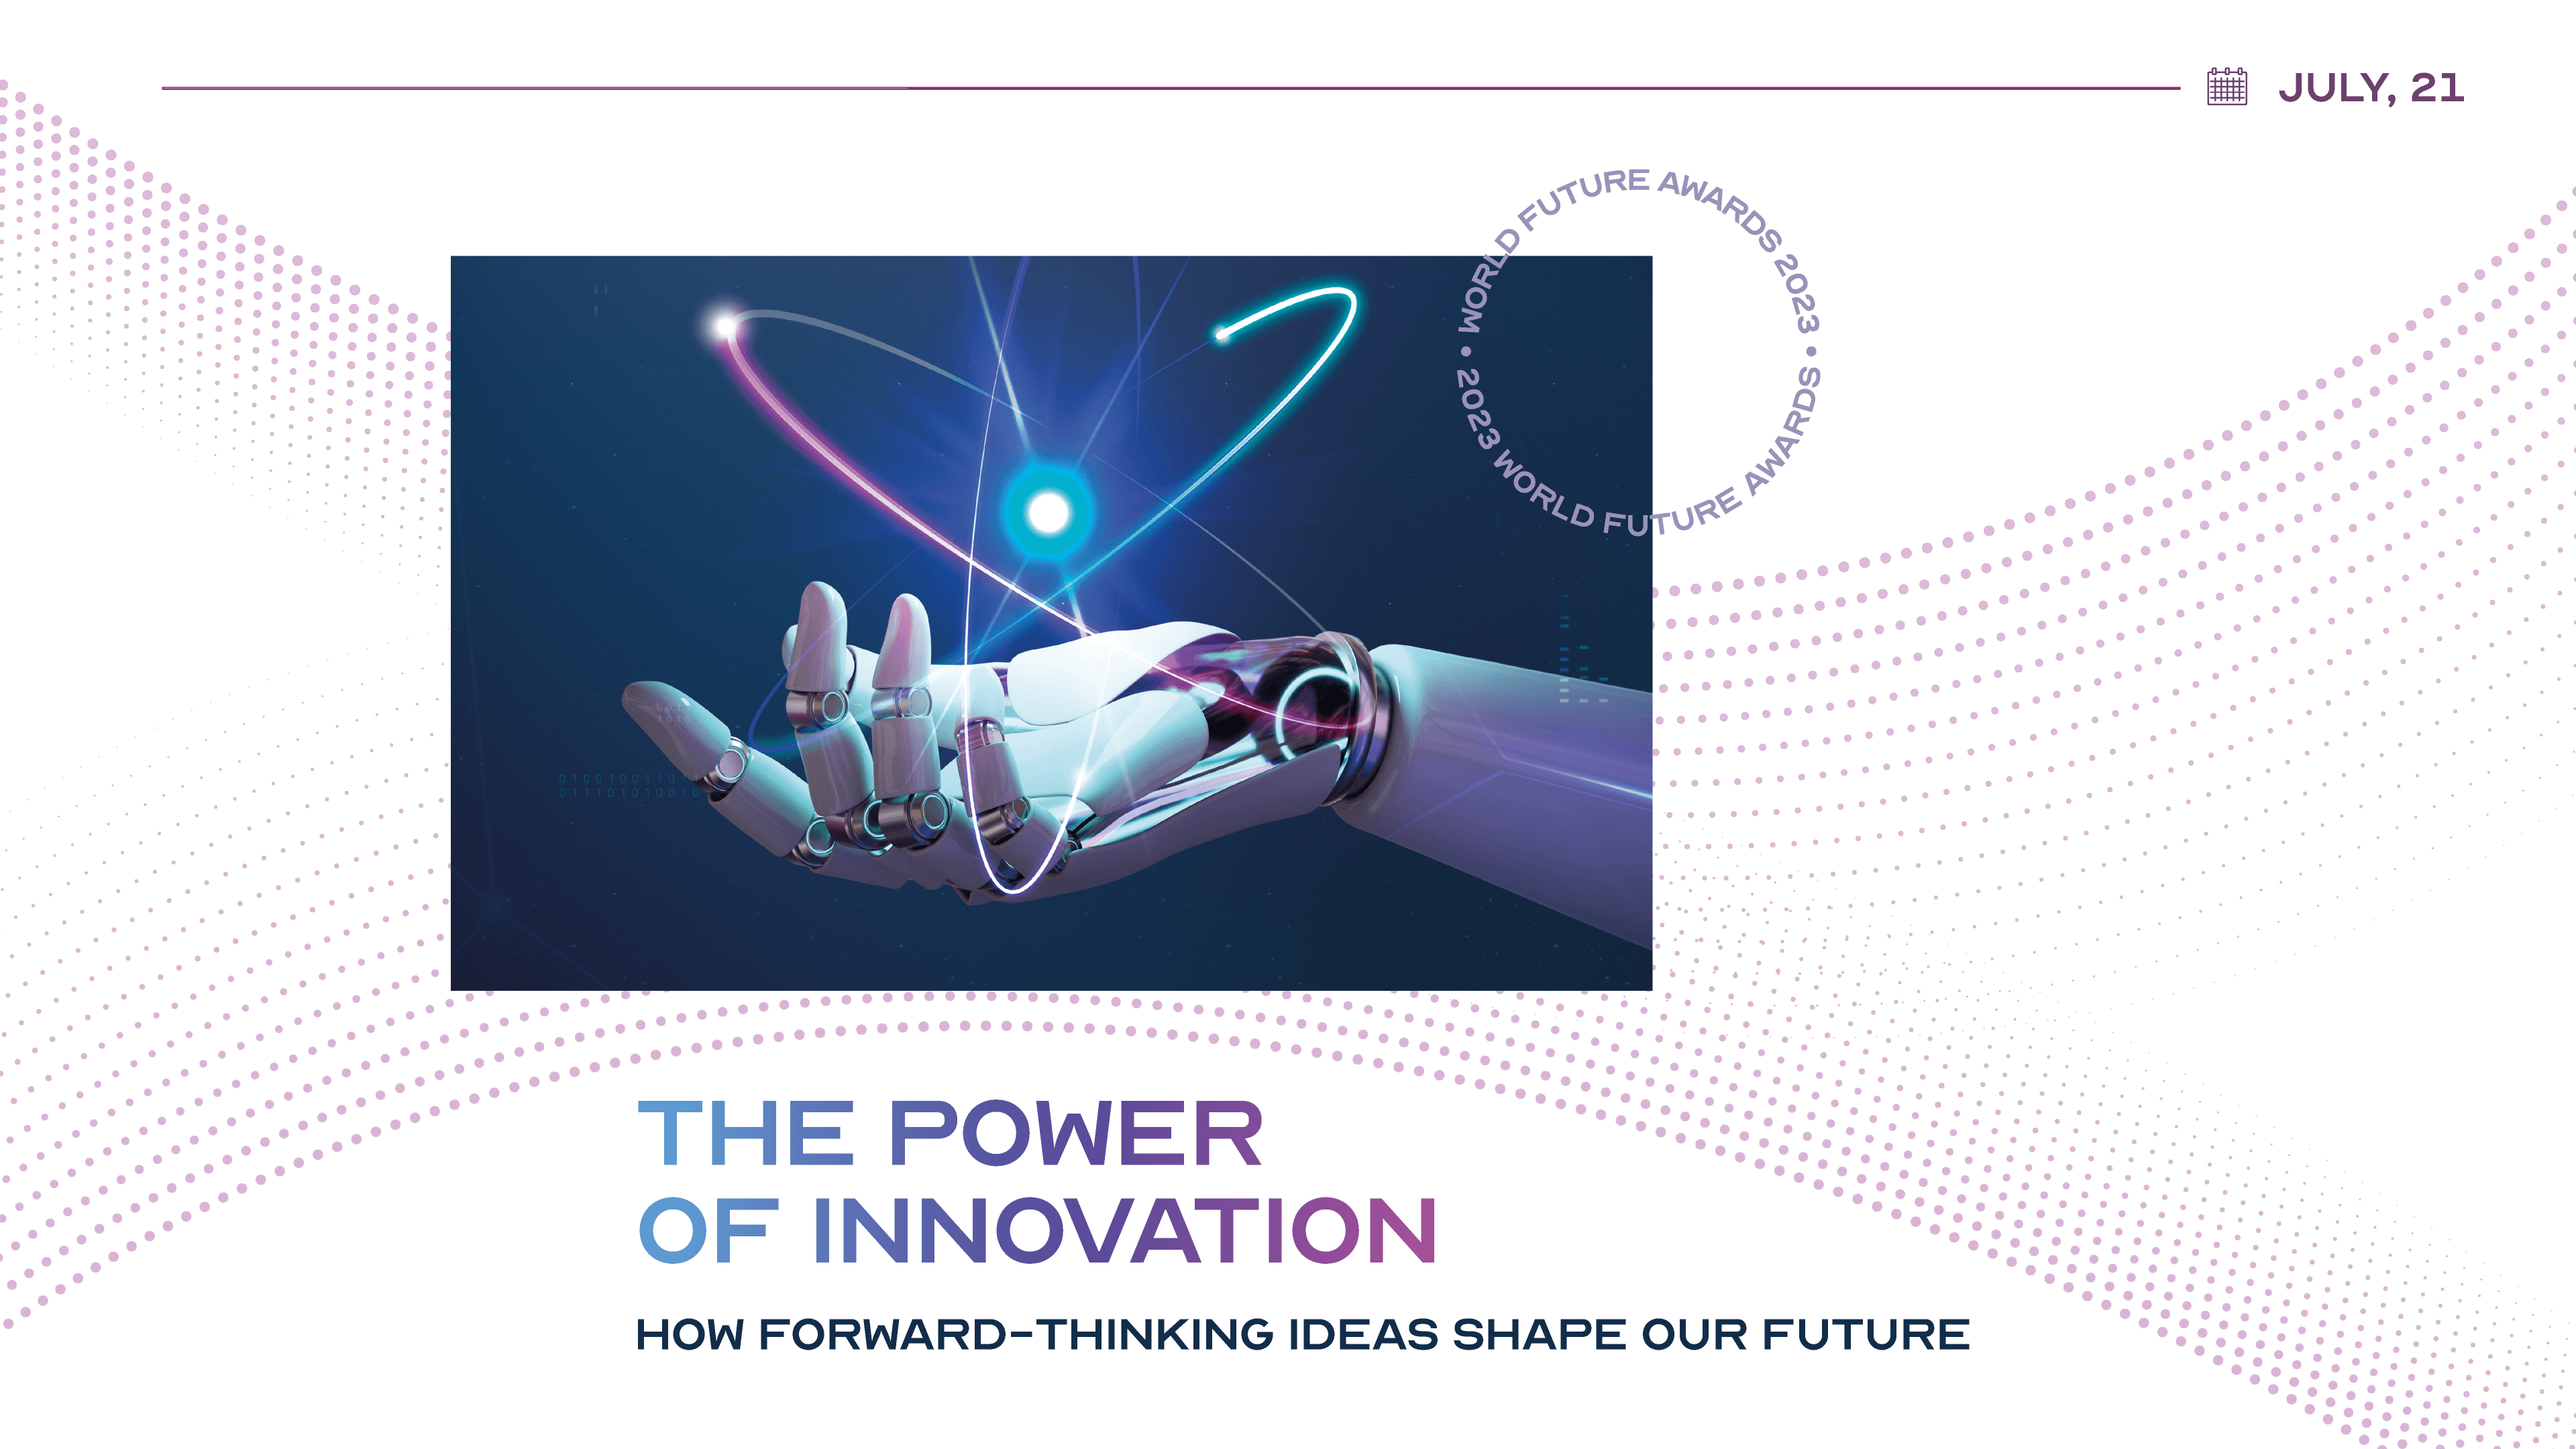 The Power of Innovation: How Forward-Thinking Ideas Shape Our Future